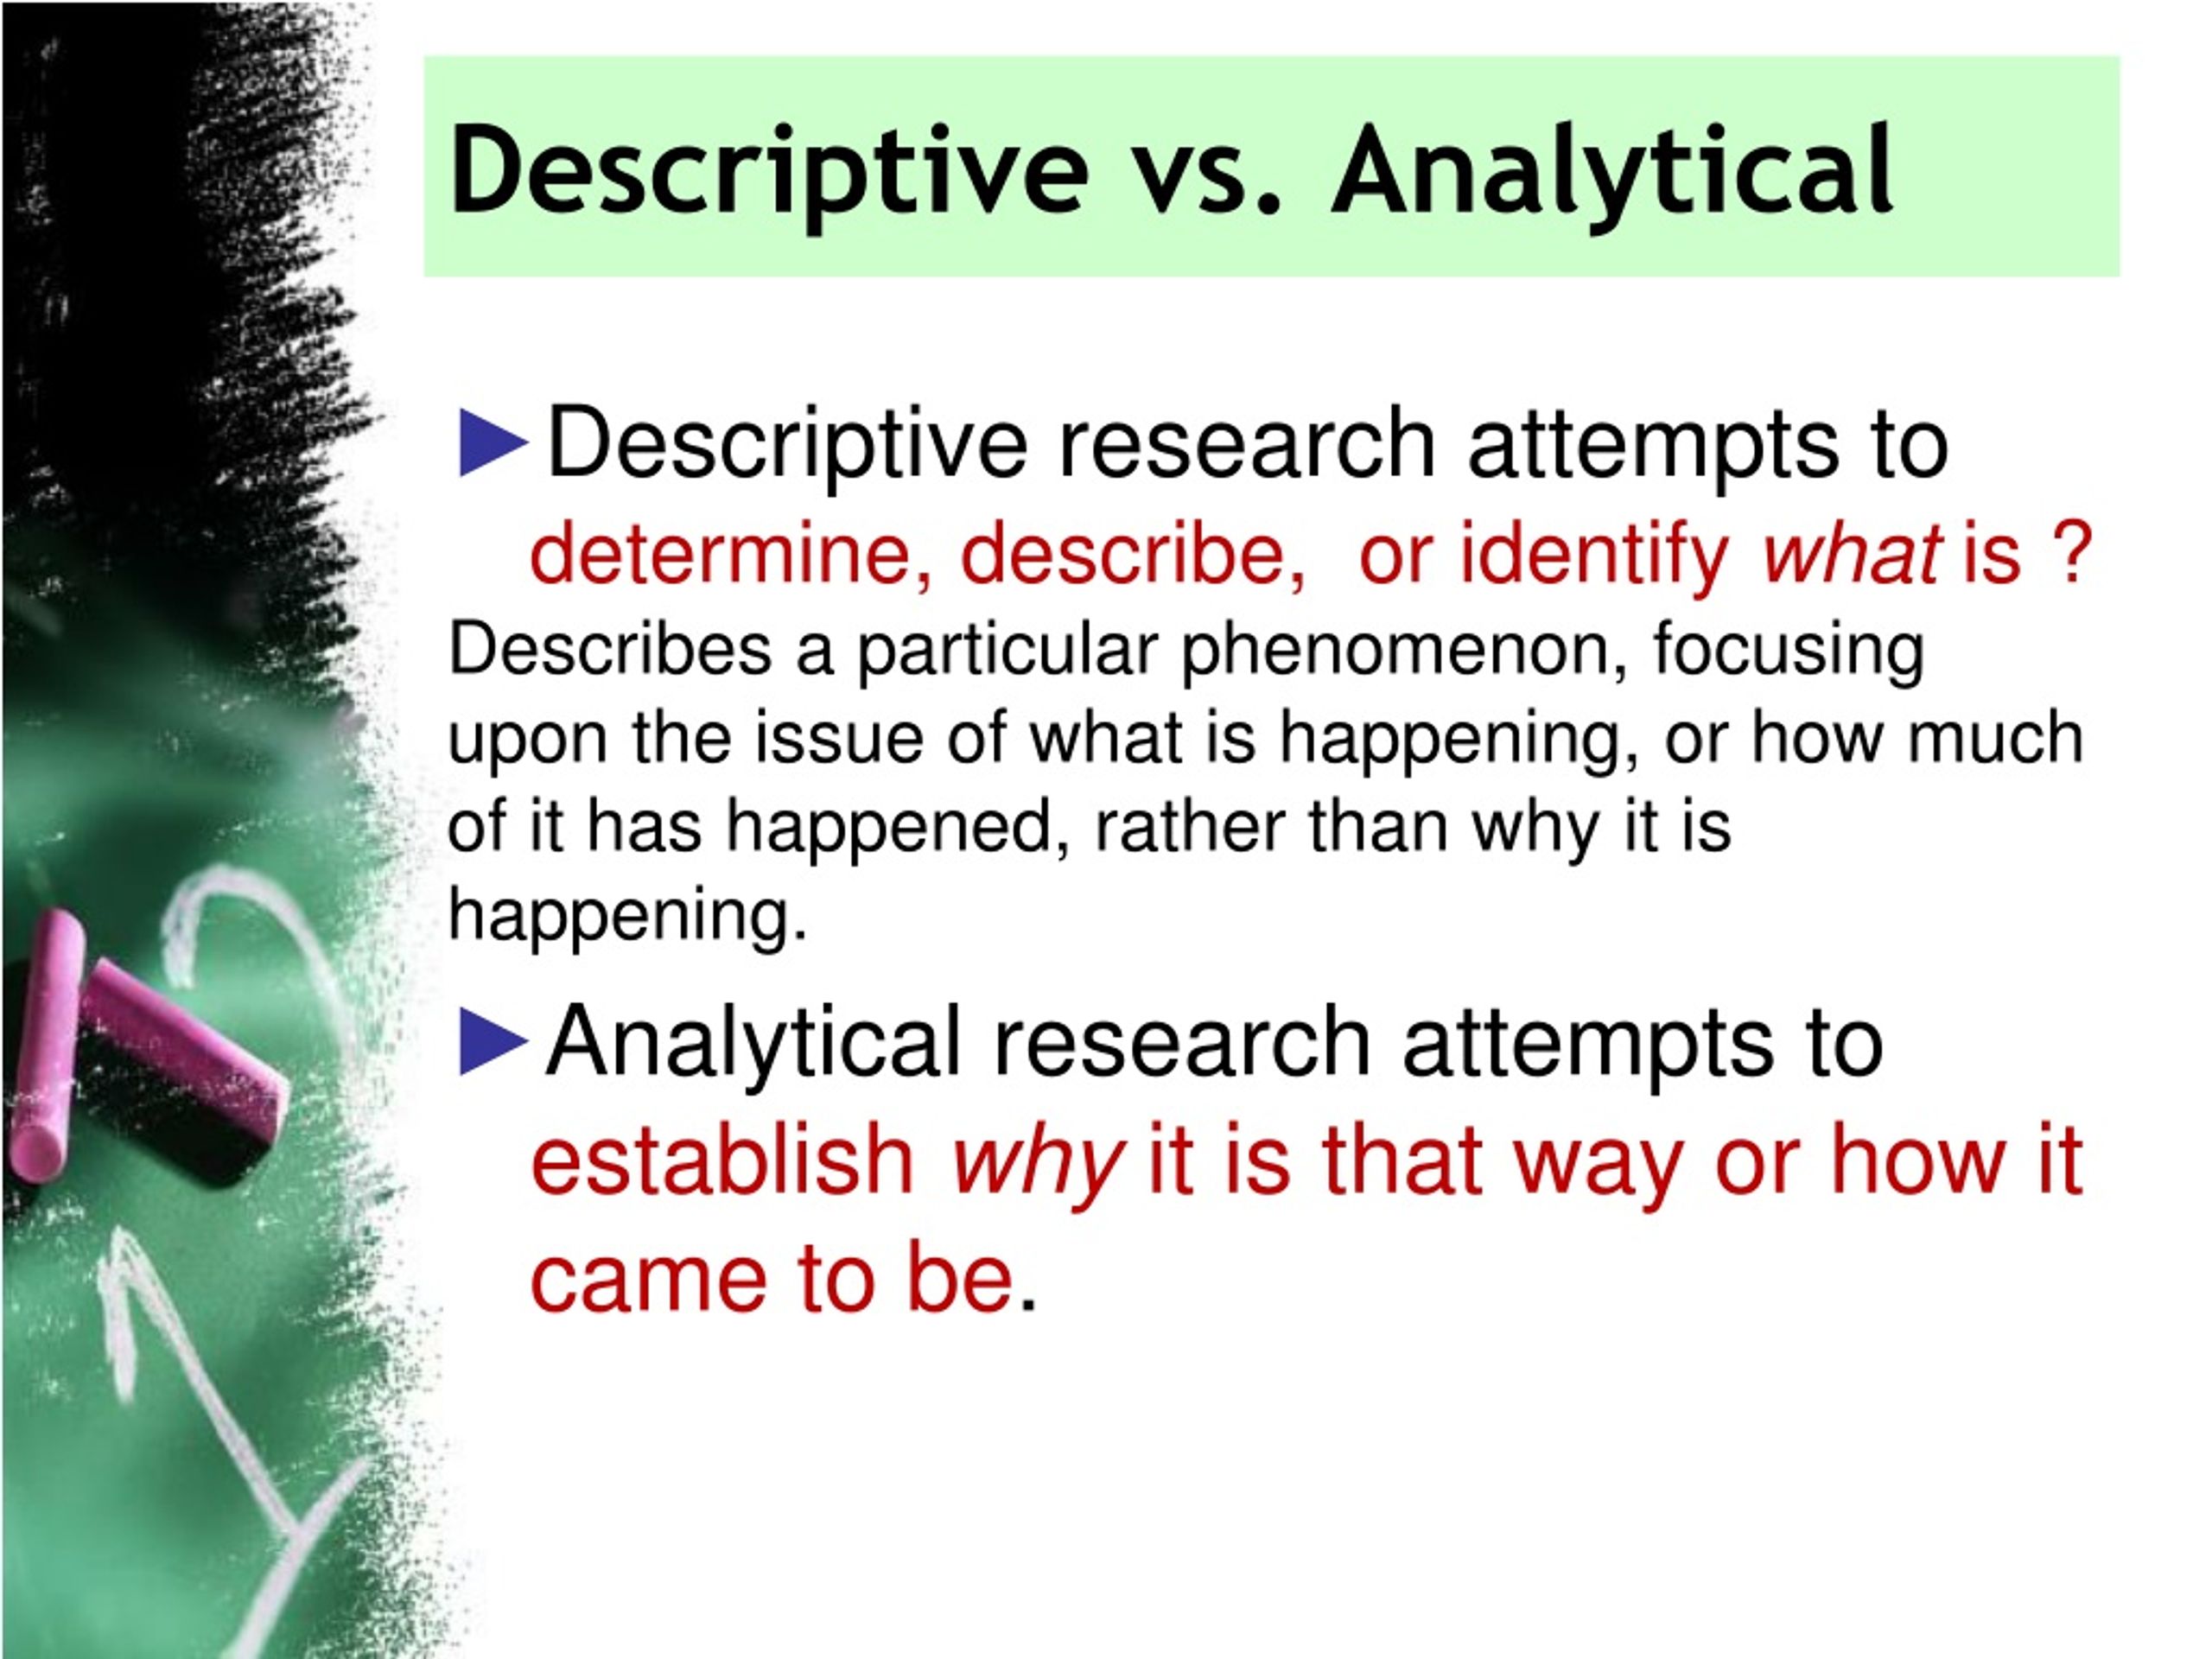 descriptive and analytical research